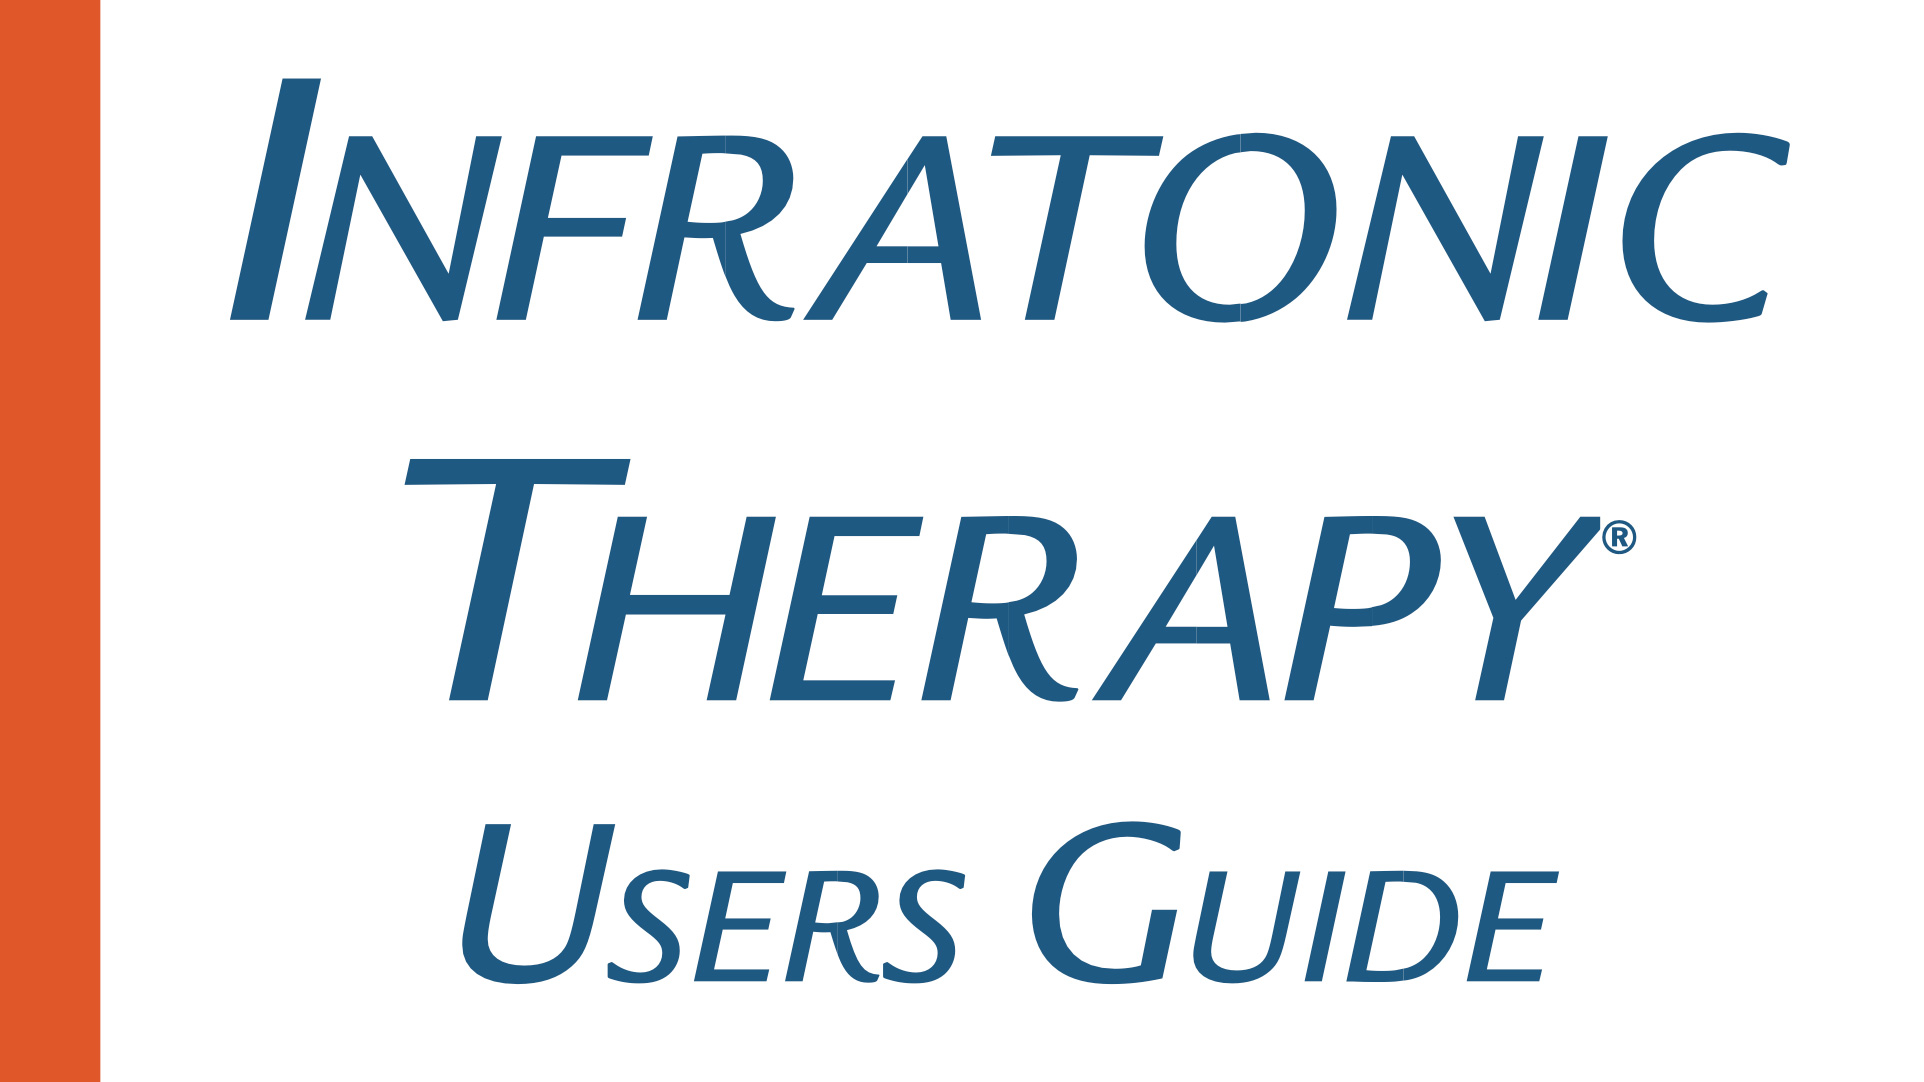 Infratonic Therapy Users Guide